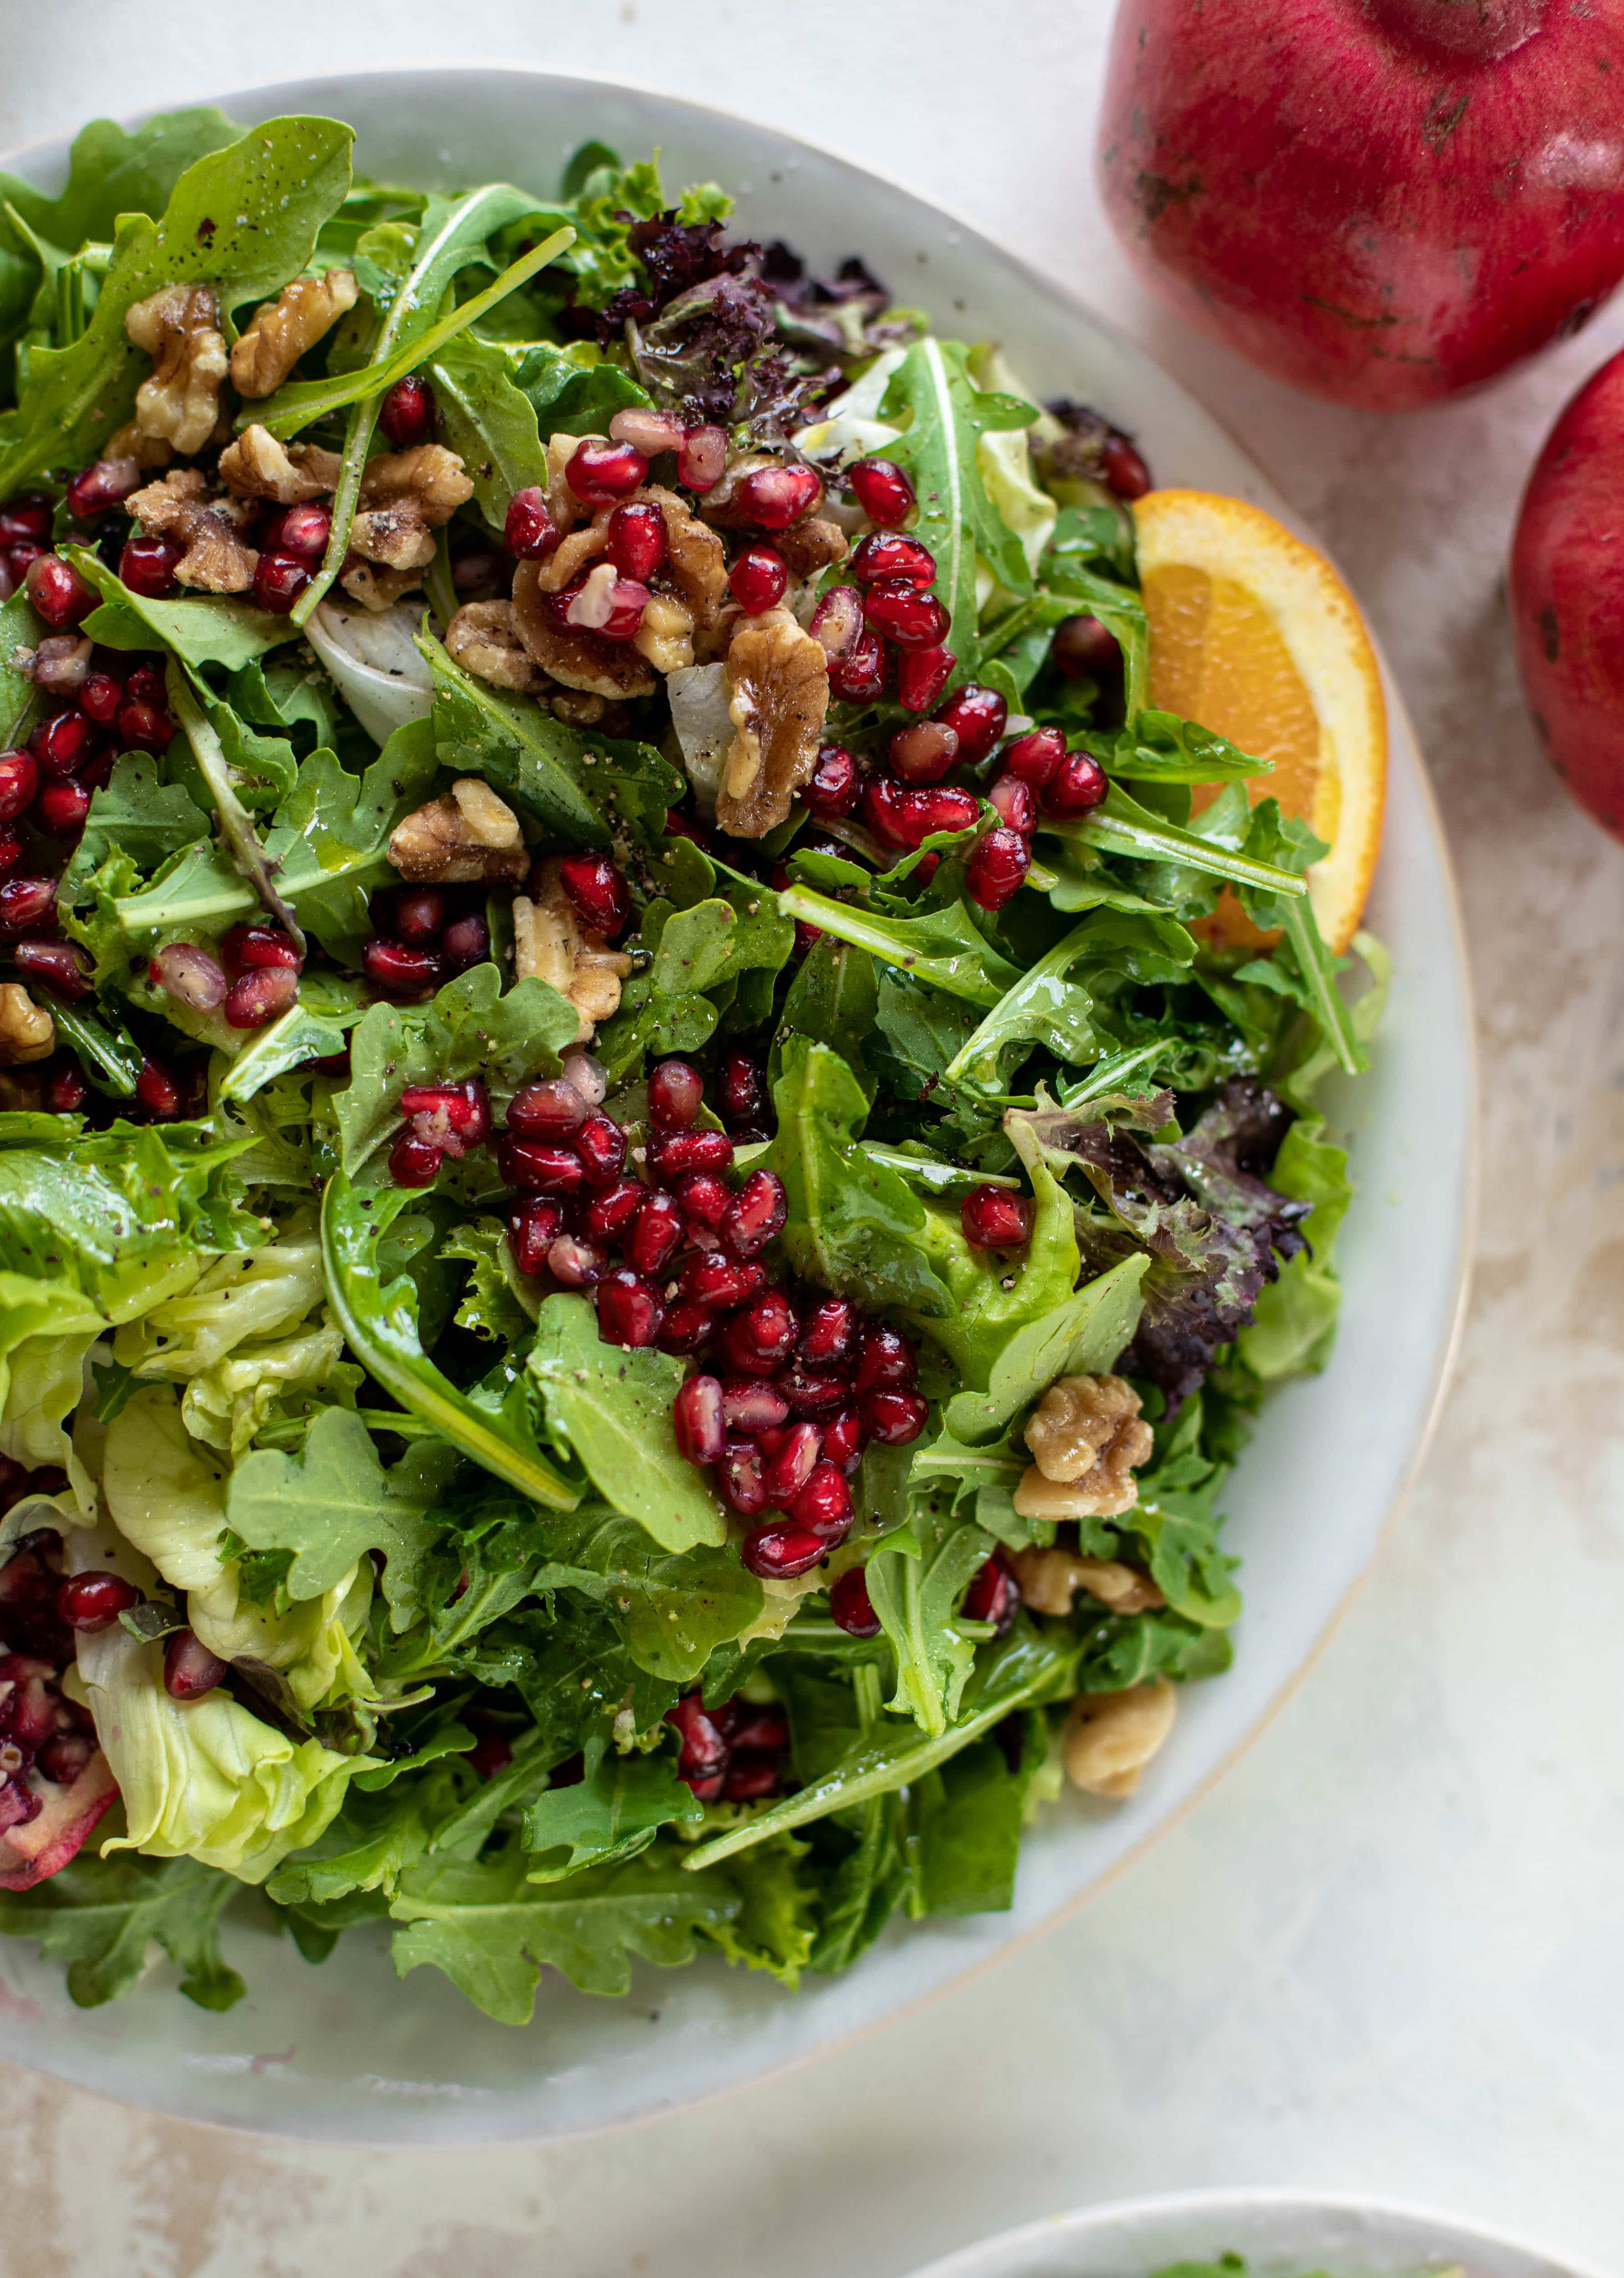 A pomegranate halloumi salad that's the perfect starter to your holiday meal! Drizzle with a spiced orange vinaigrette for the most festive flavor ever.